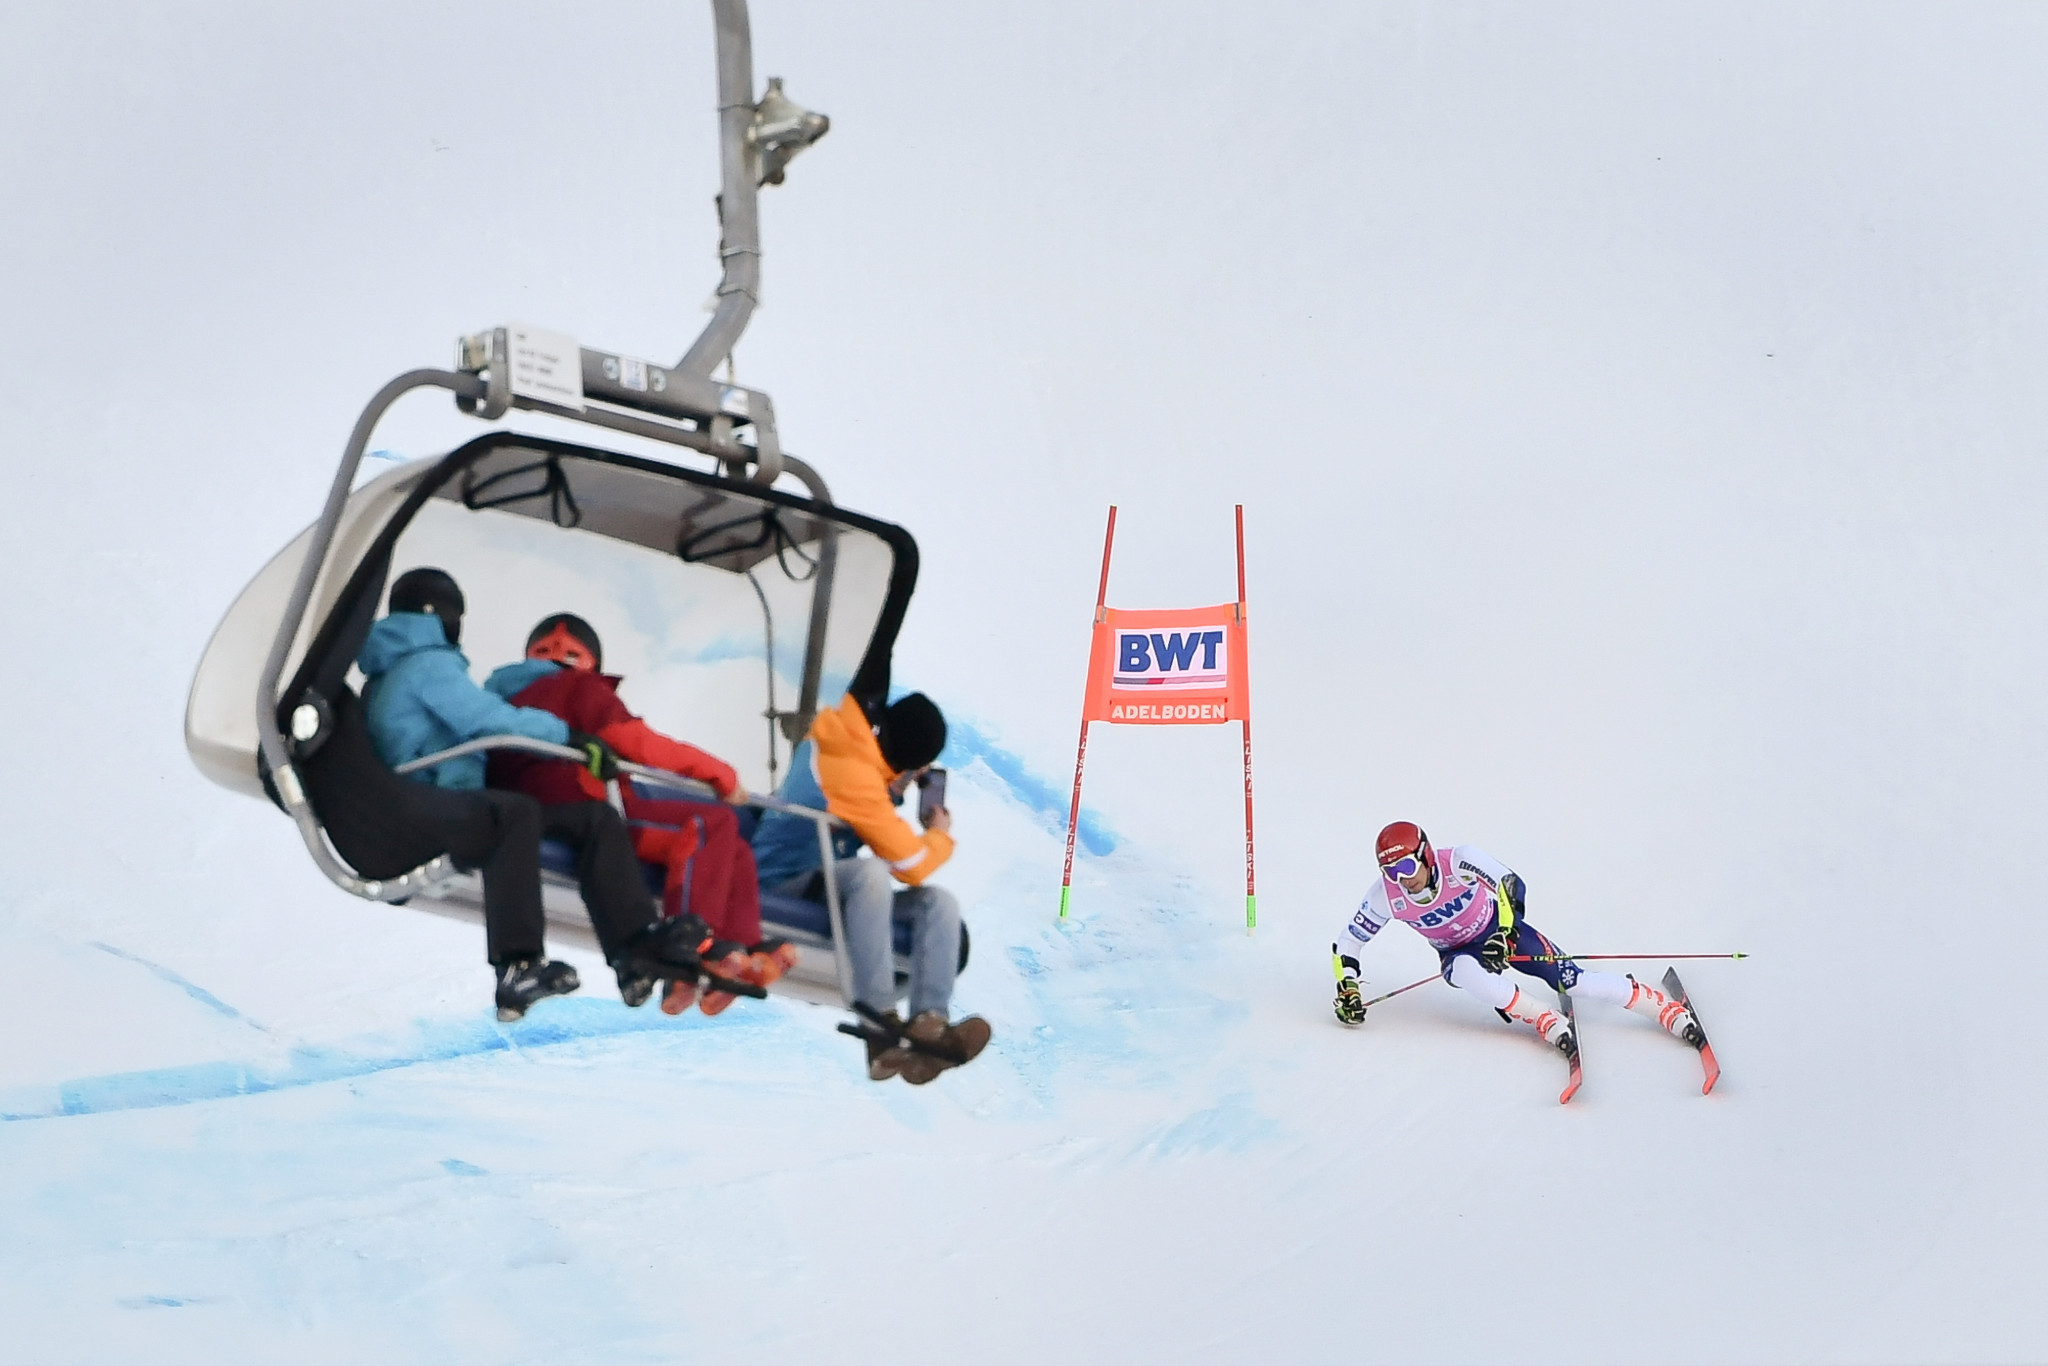 Zan Kranjec of Slovenia was watched by spectators on a ski lift as he raced to a gold medal ©Getty Images